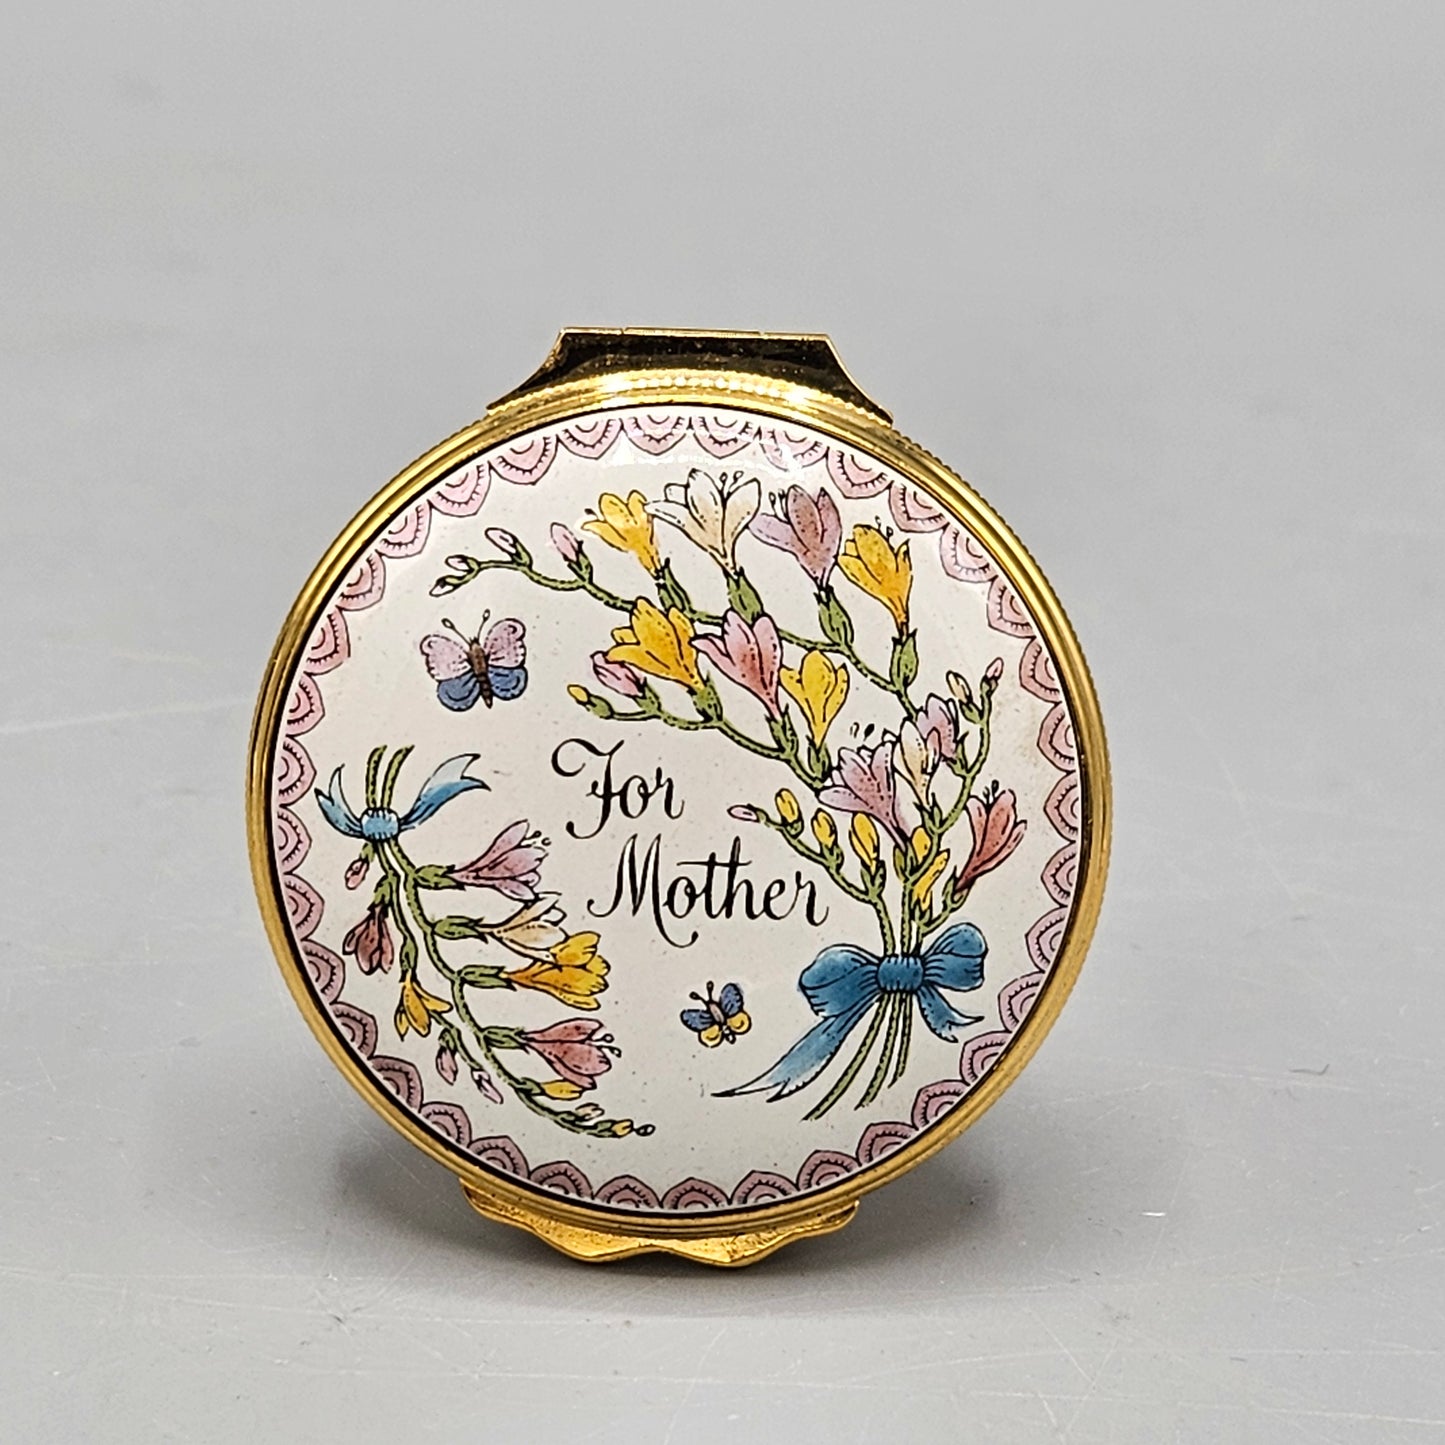 1985 Halcyon Days Enamel "For Mother" Box